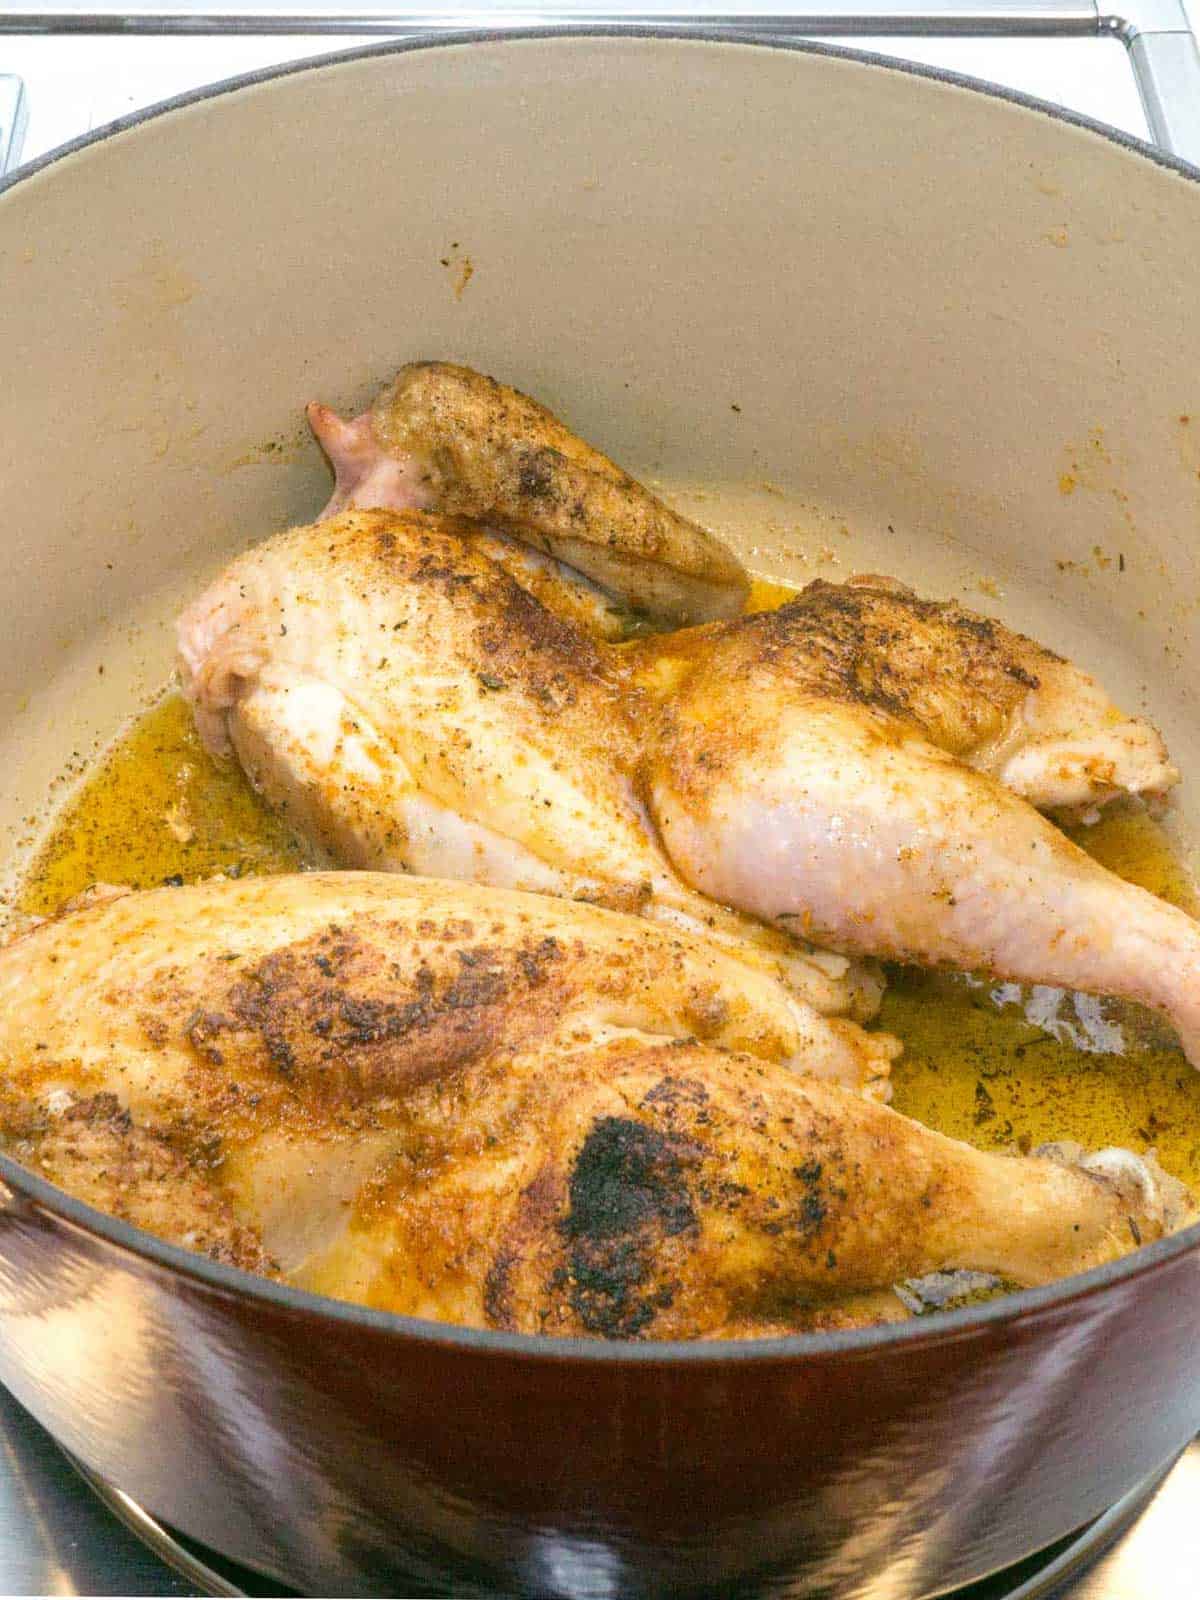 Browning chicken in a Dutch oven.